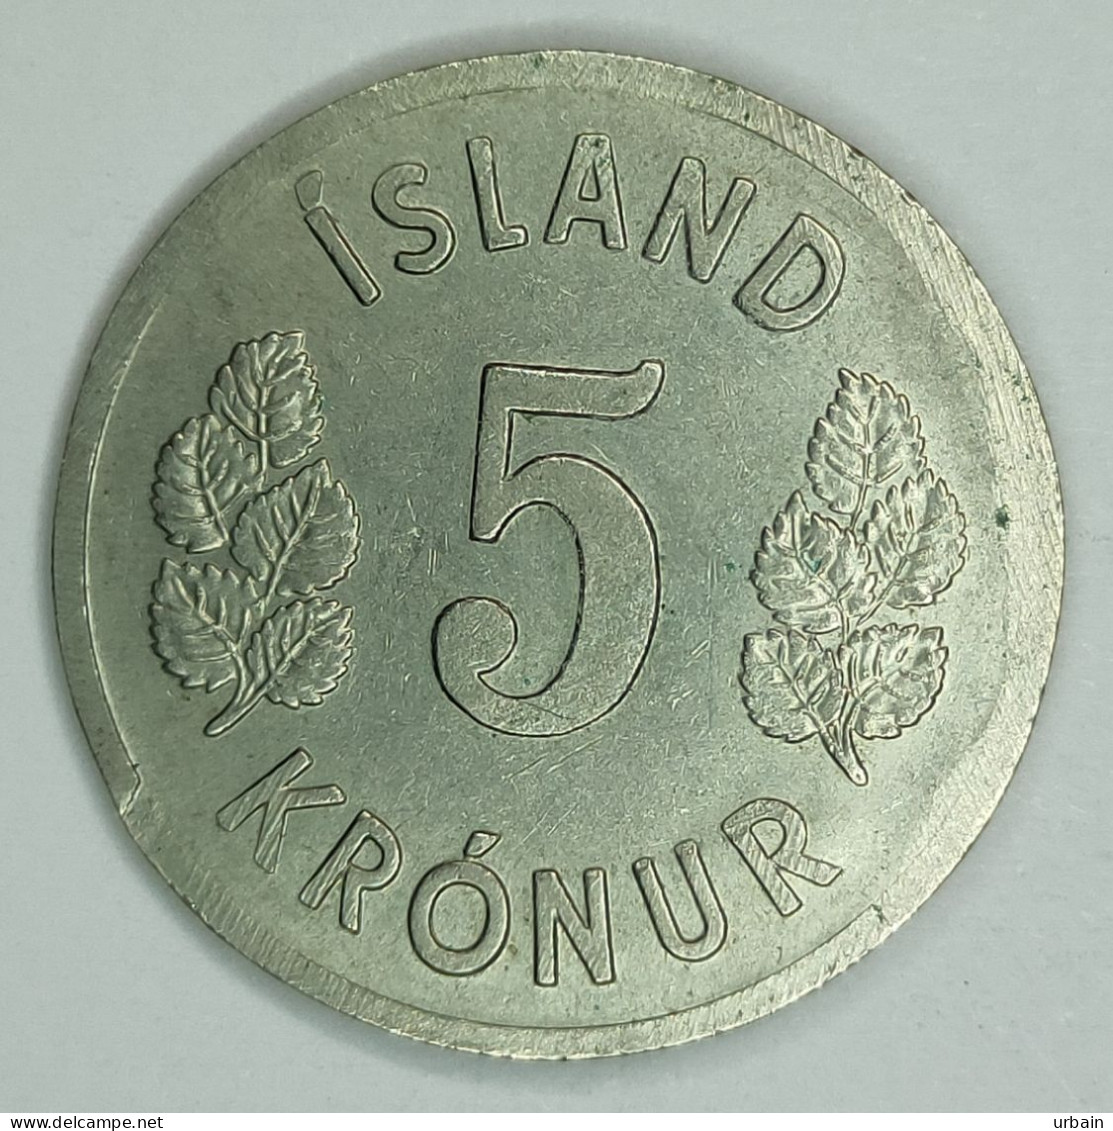 2x Coins - ICELAND - Republic Of Iceland (1944 - 1980) - IJsland